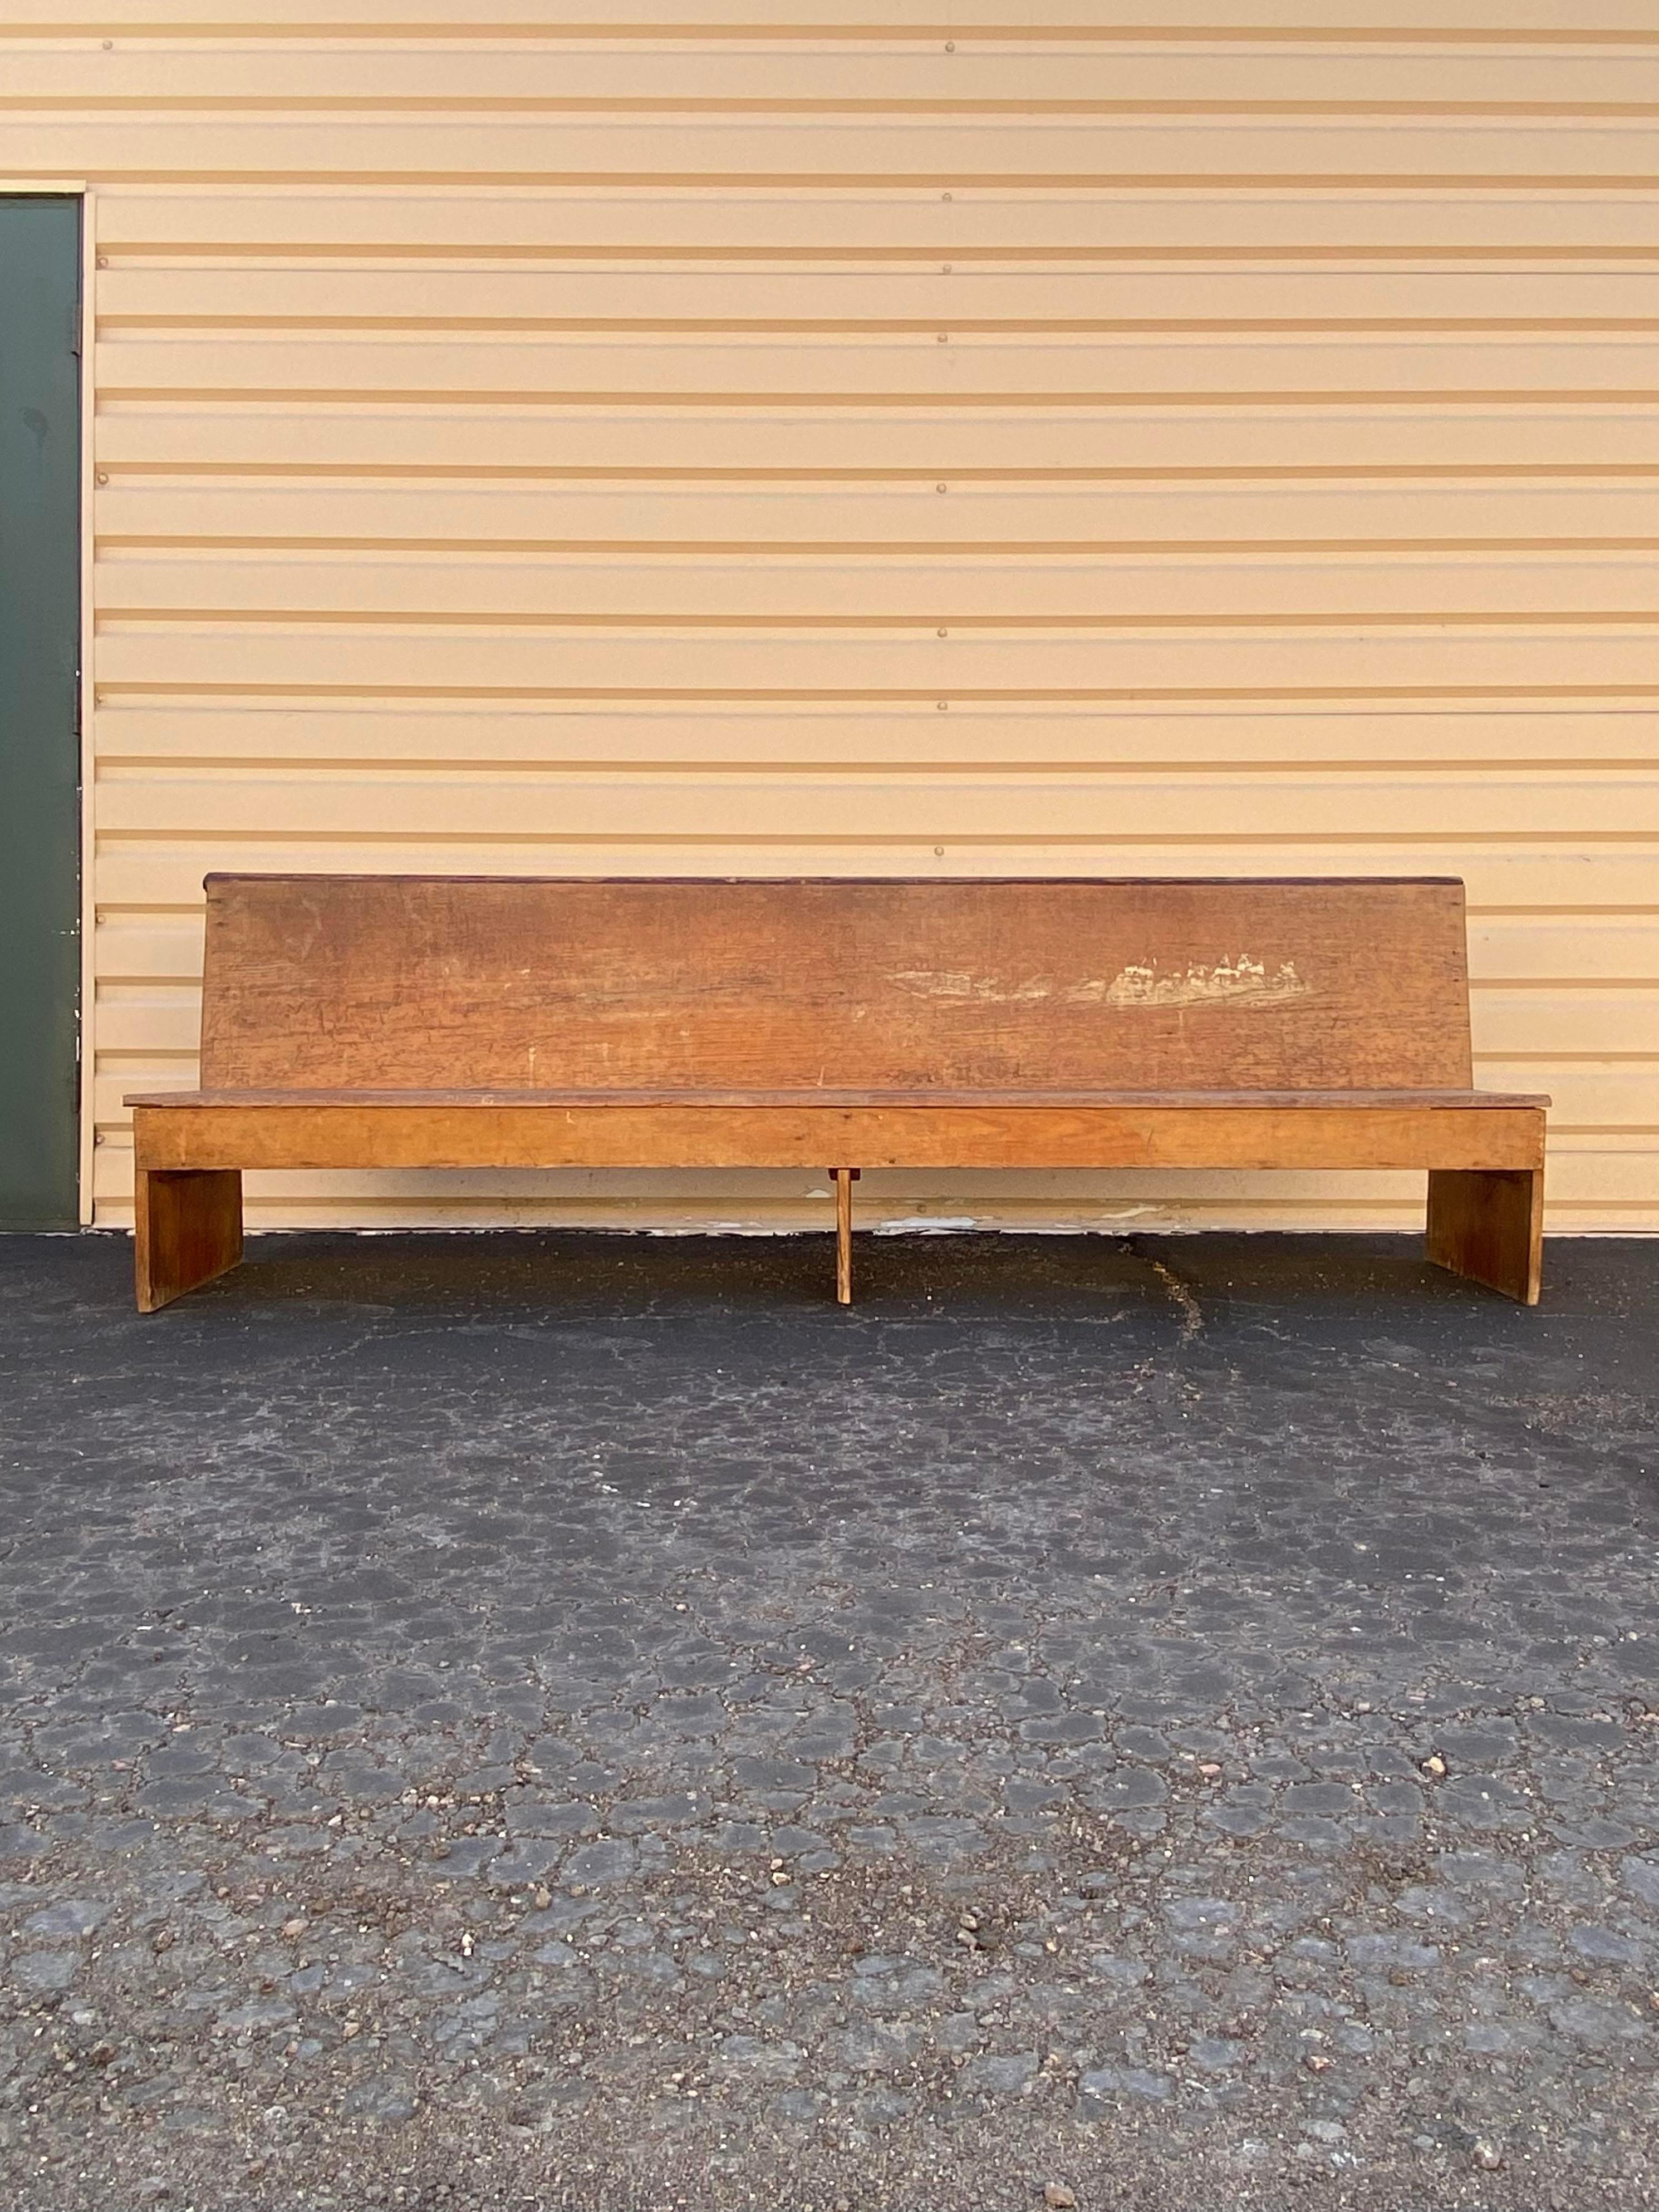 Mennonite bench which was in the same Colorado family since the early 1900s. A simple and sturdy piece, with original patina, a rare gem. A clean, Minimalist piece for seating or commercial display of books and objects.

89”W x 17”D x 28.13”H with a